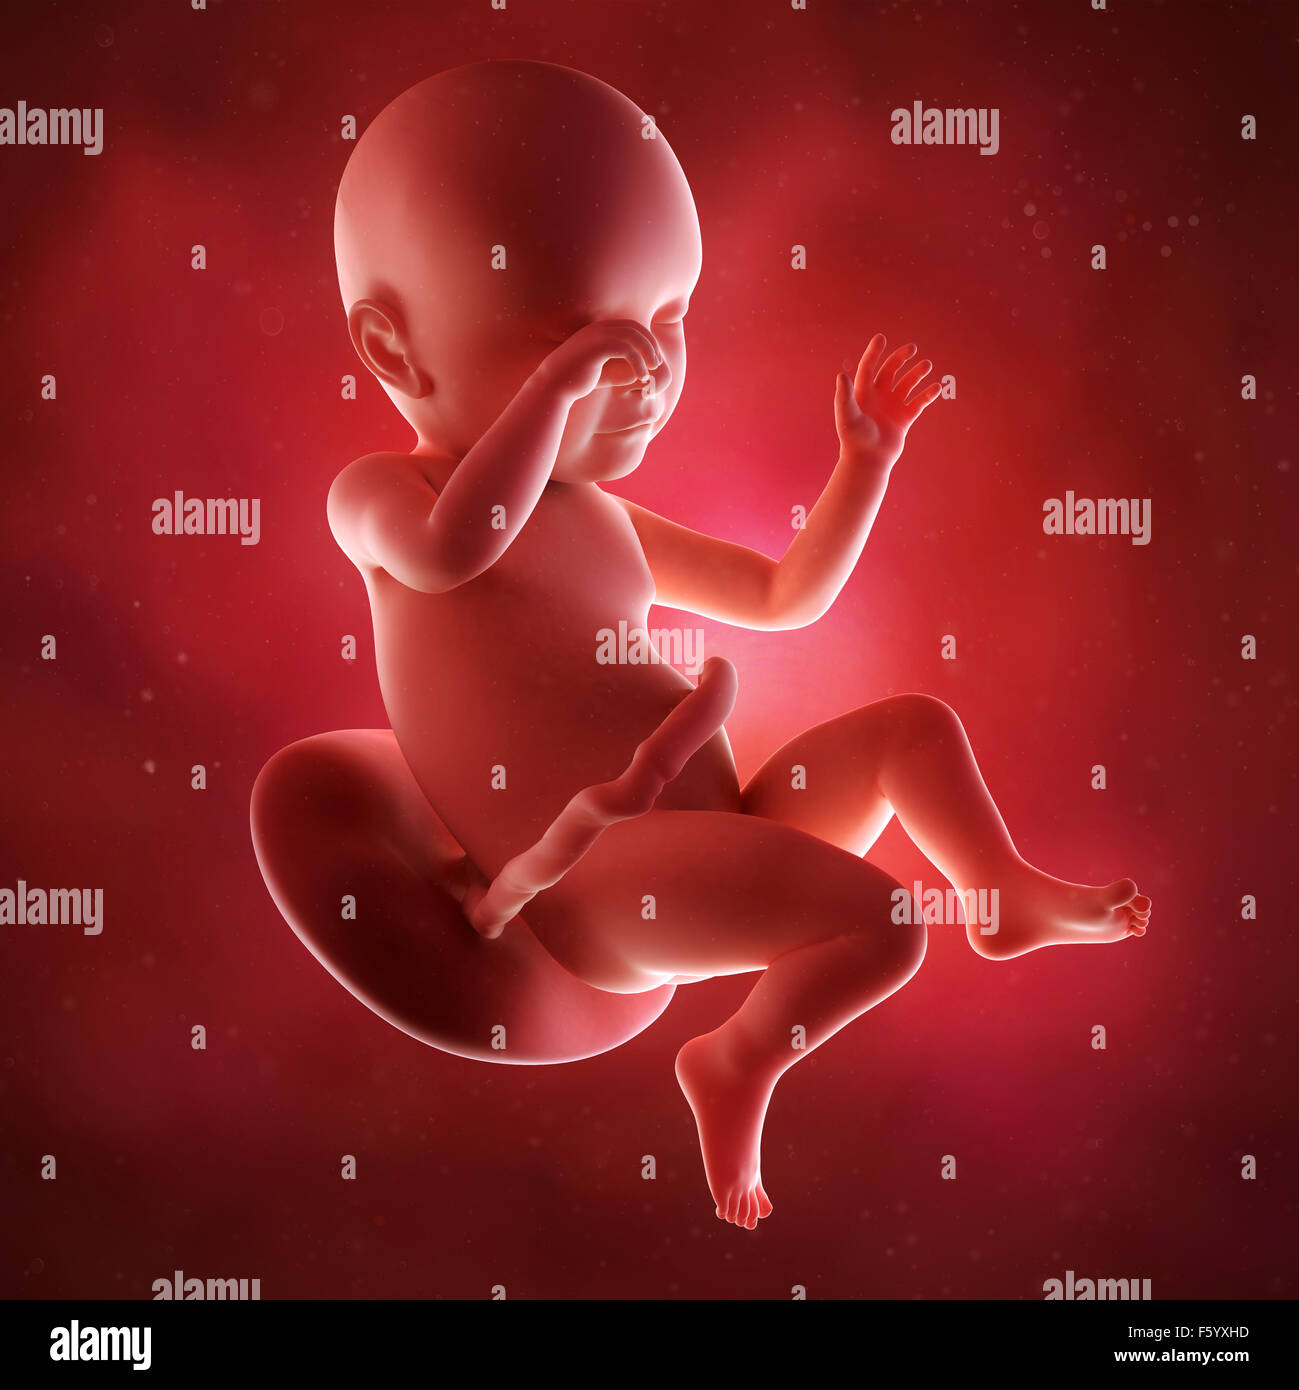 medical accurate 3d illustration of a fetus week 39 Stock Photo